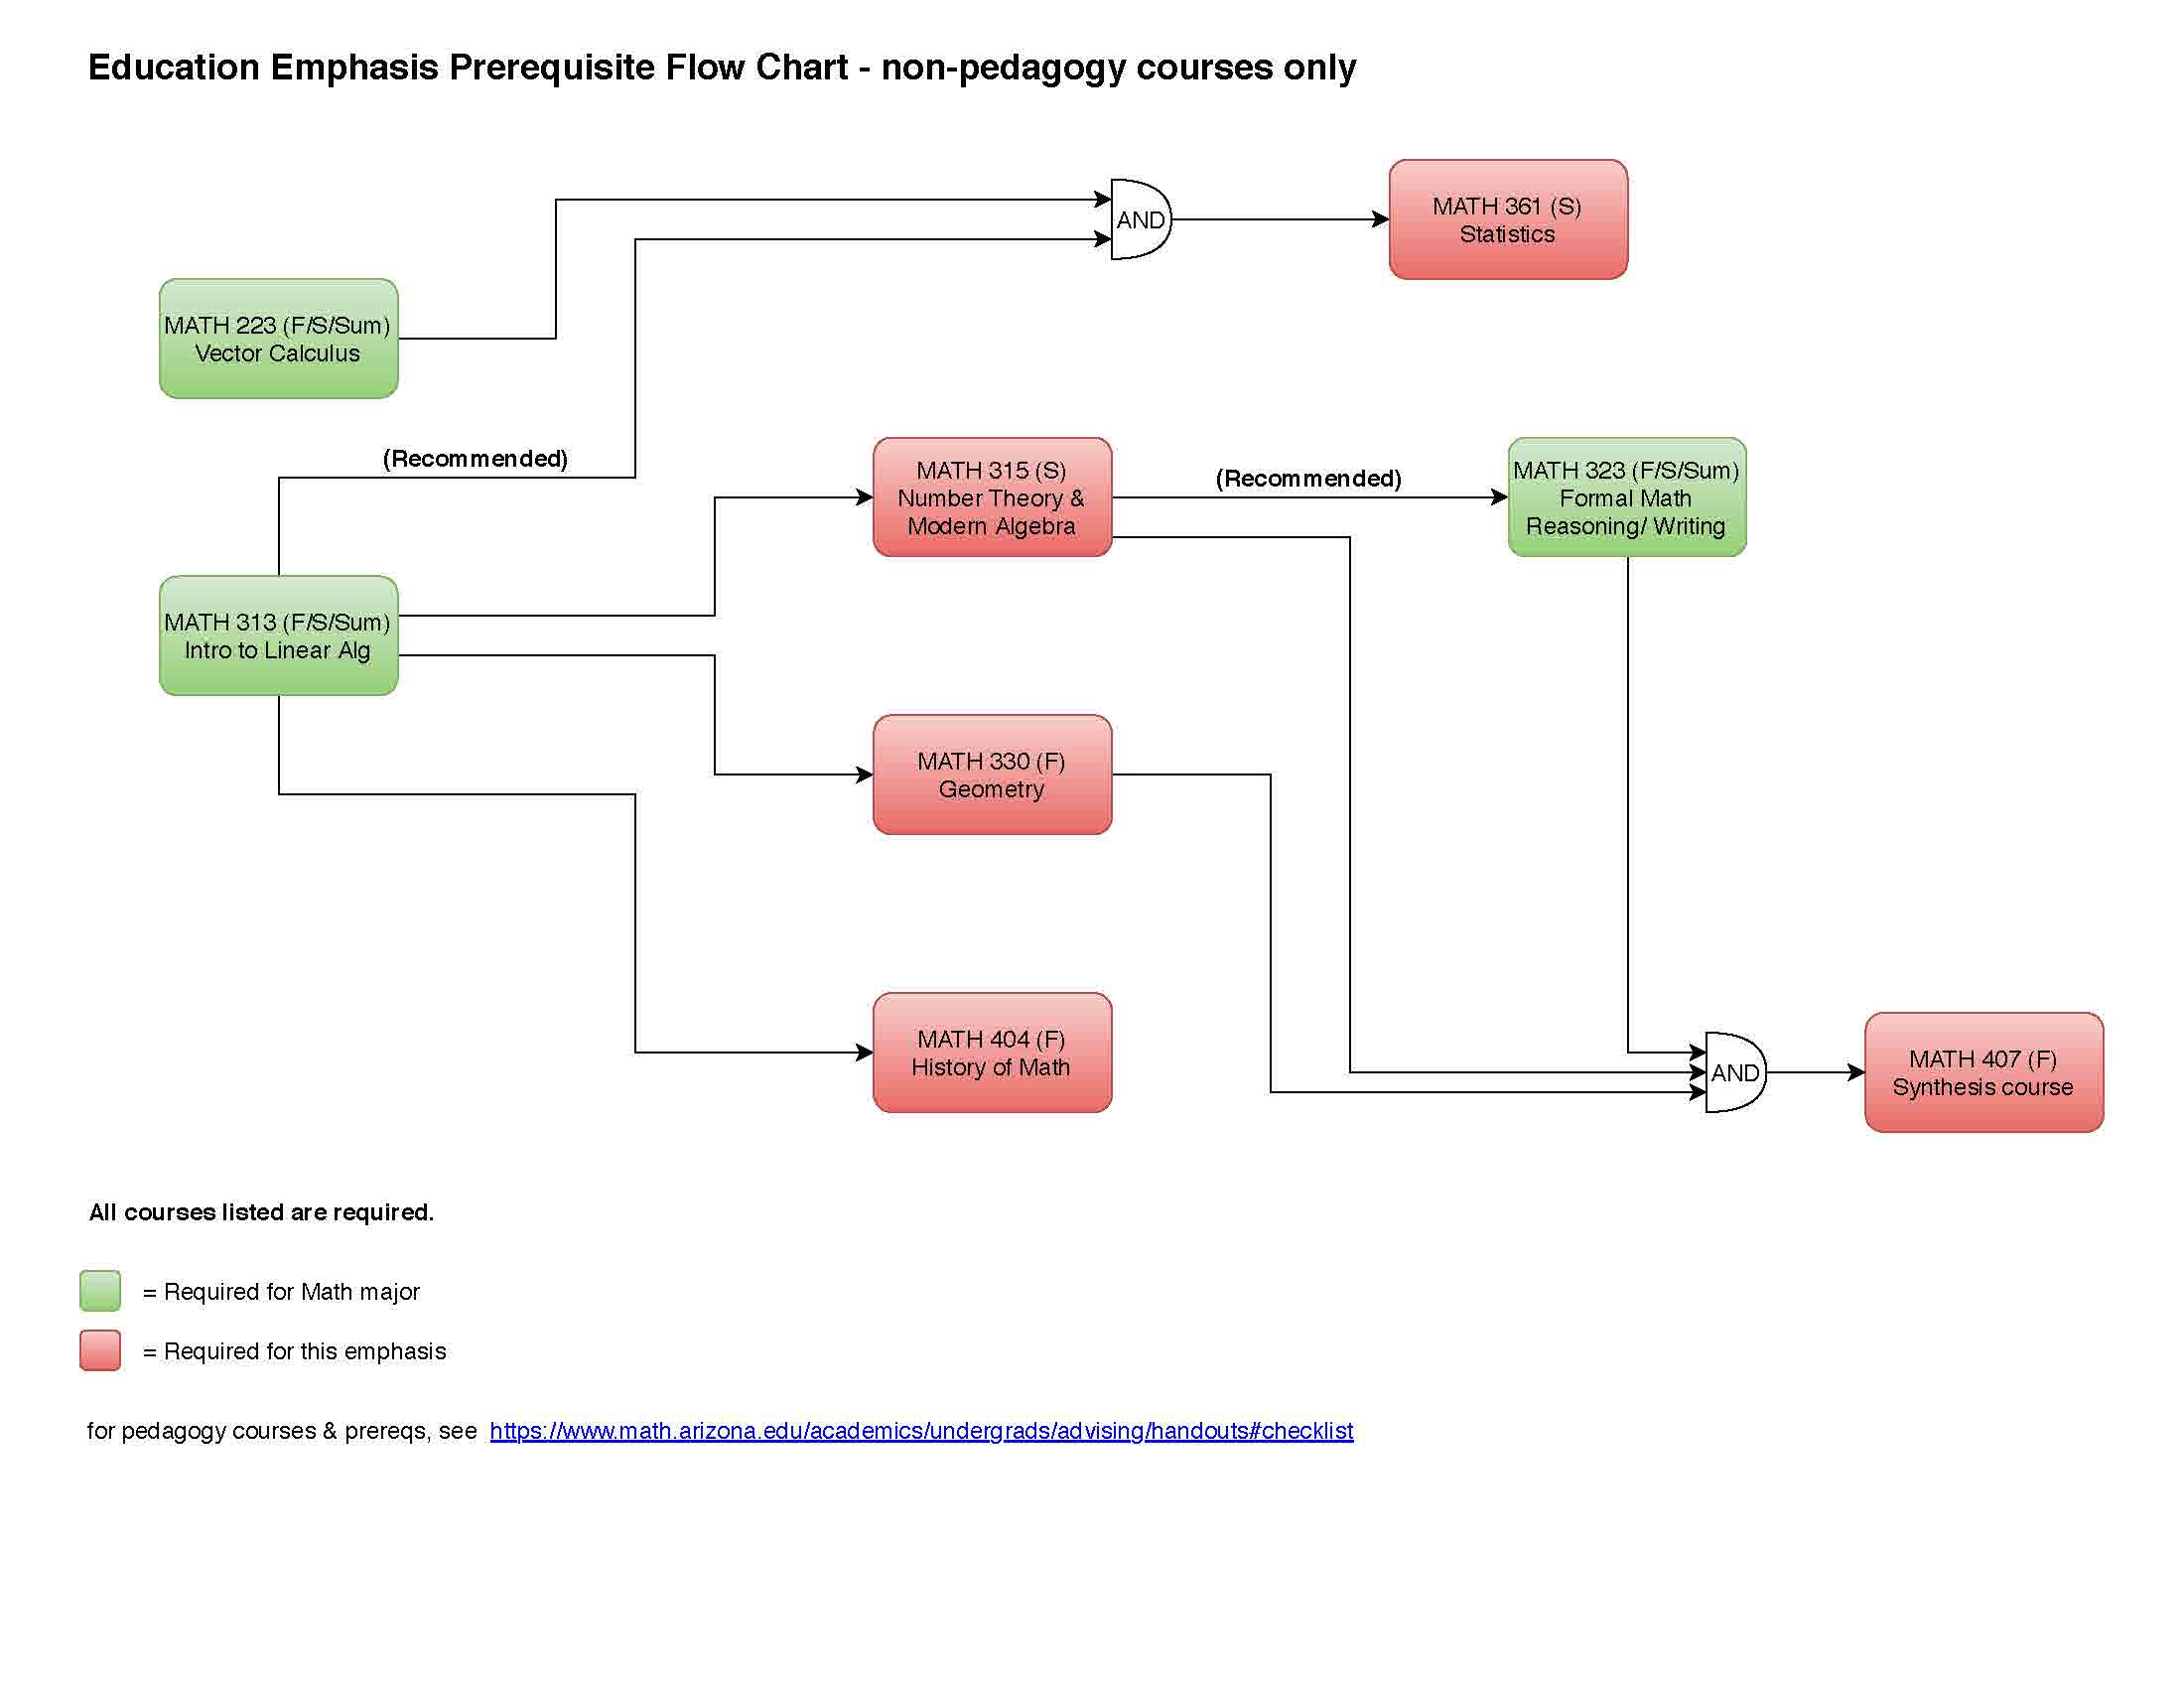 prerequisite flowchart for education emphasis (click image for downloadable PDF)